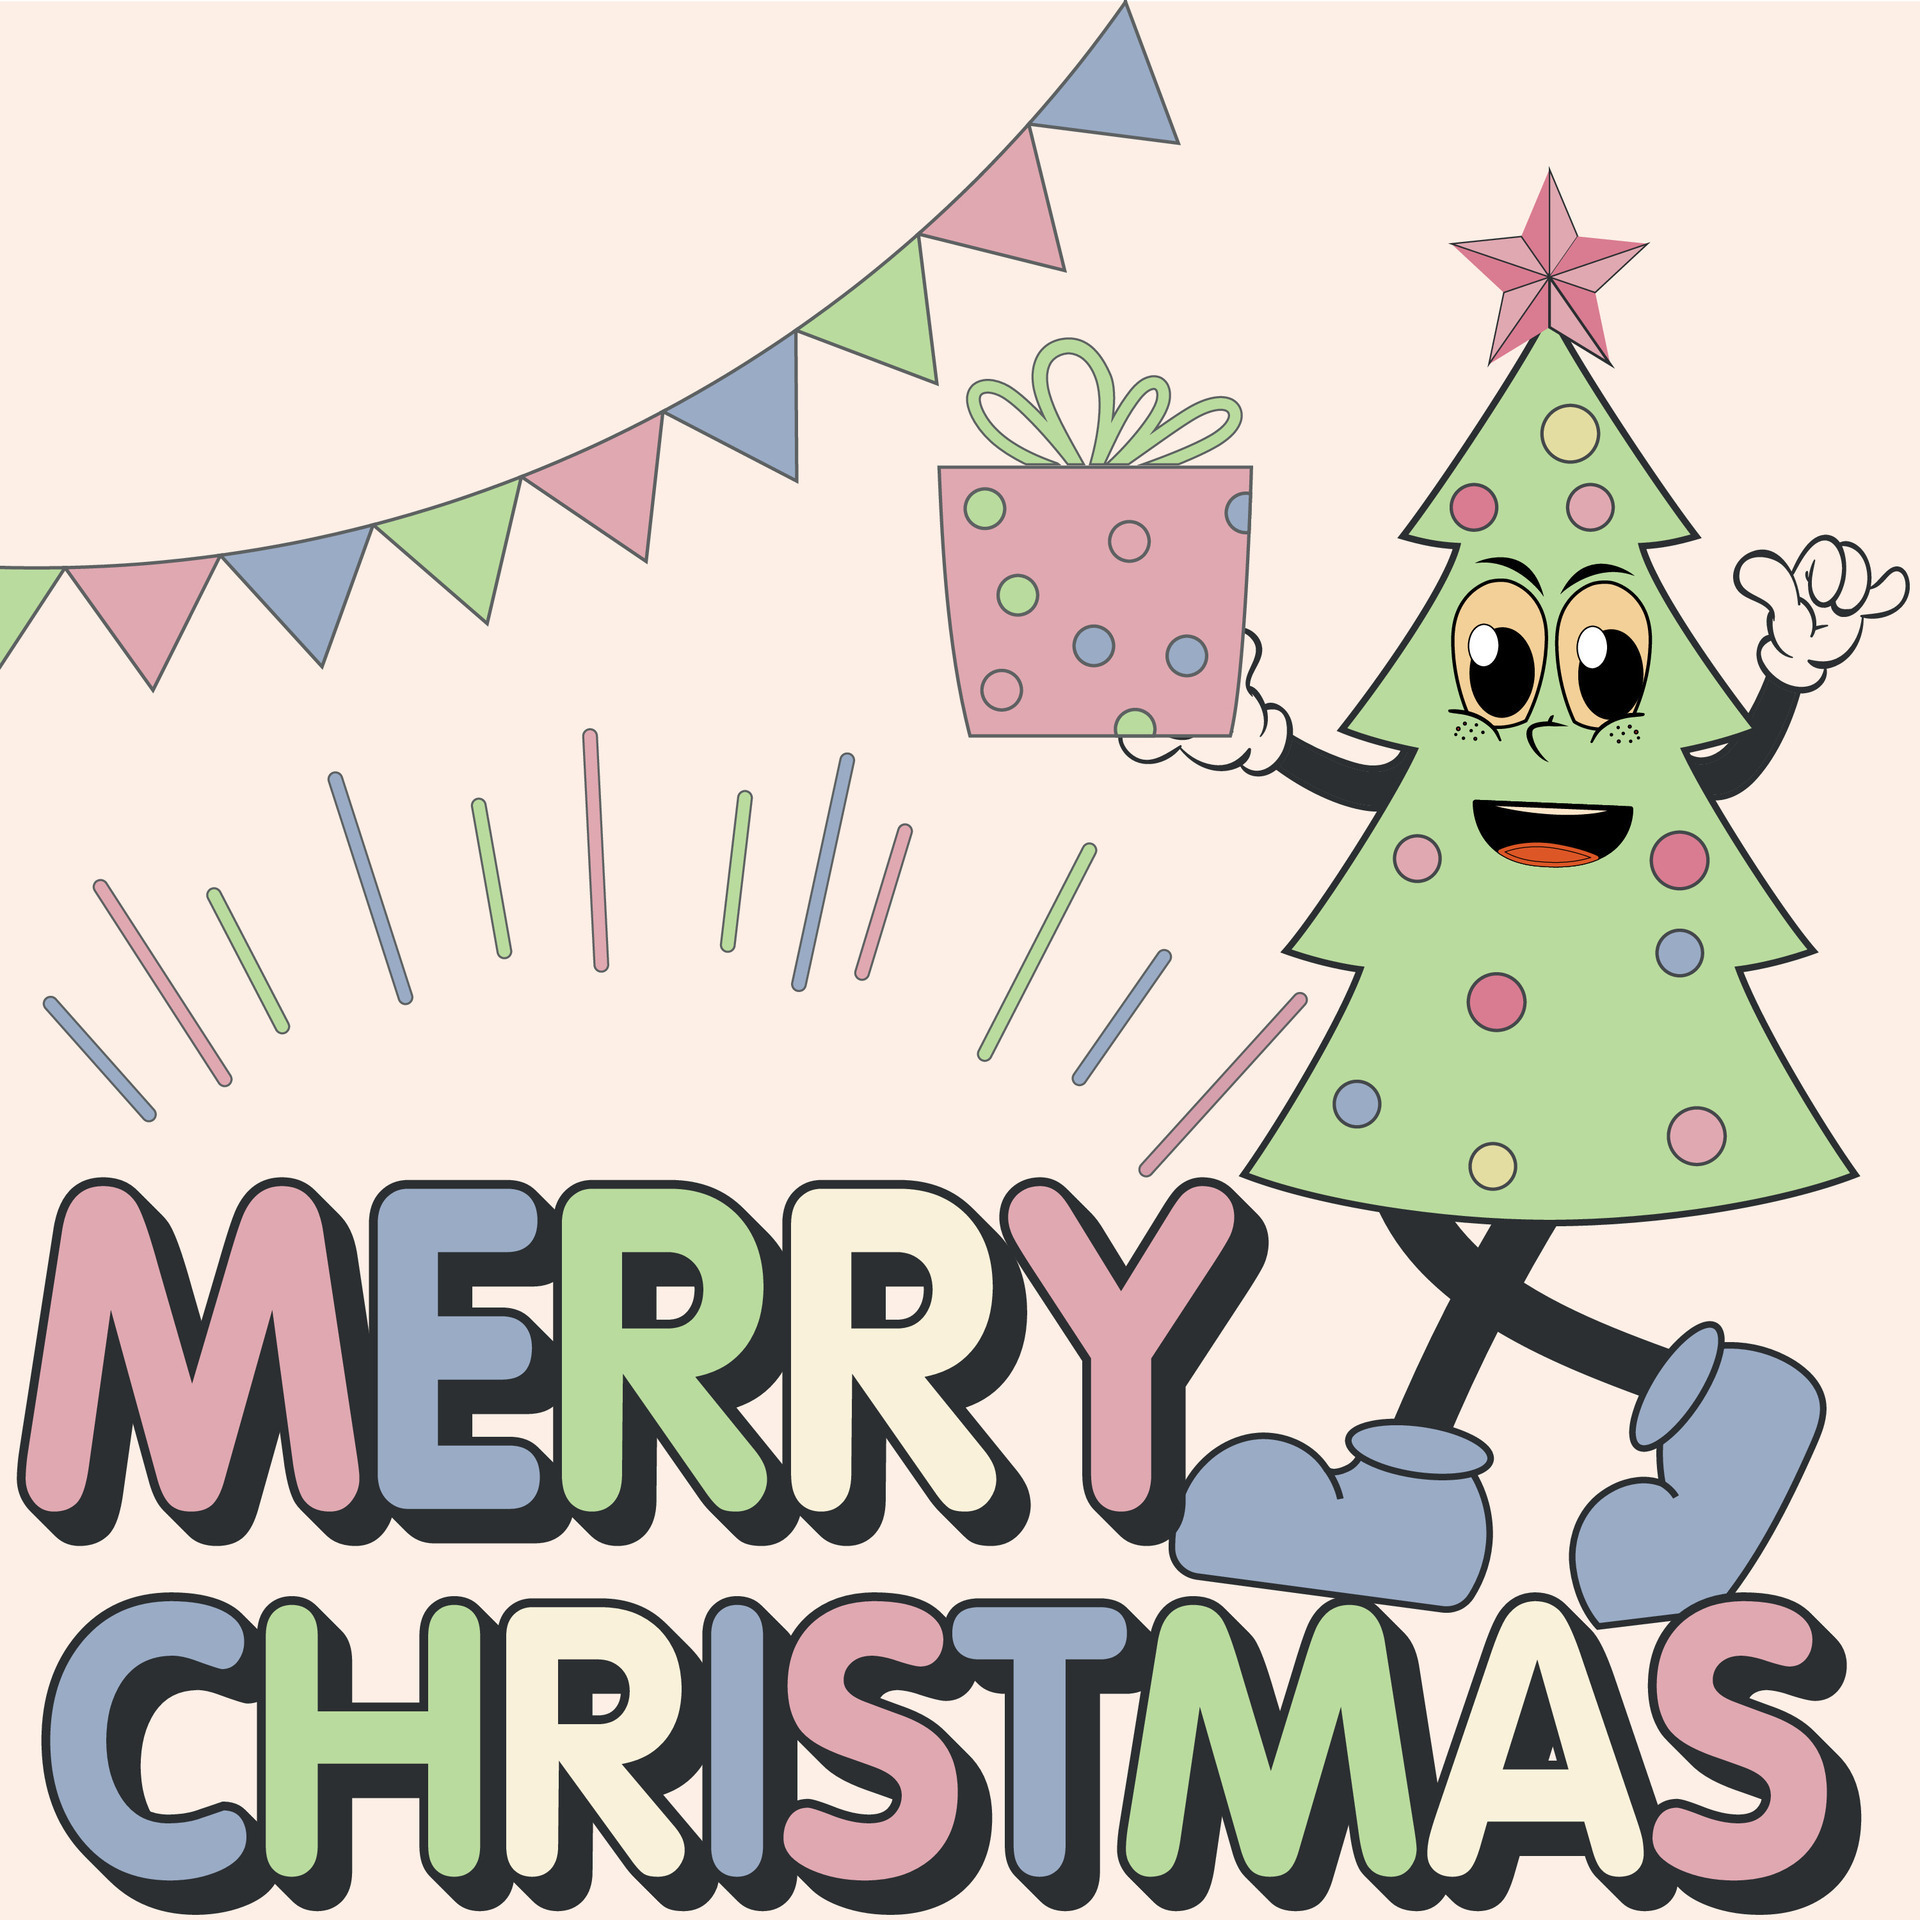 Retro Groovy Hippie Christmas with cute Christmas tree character ...